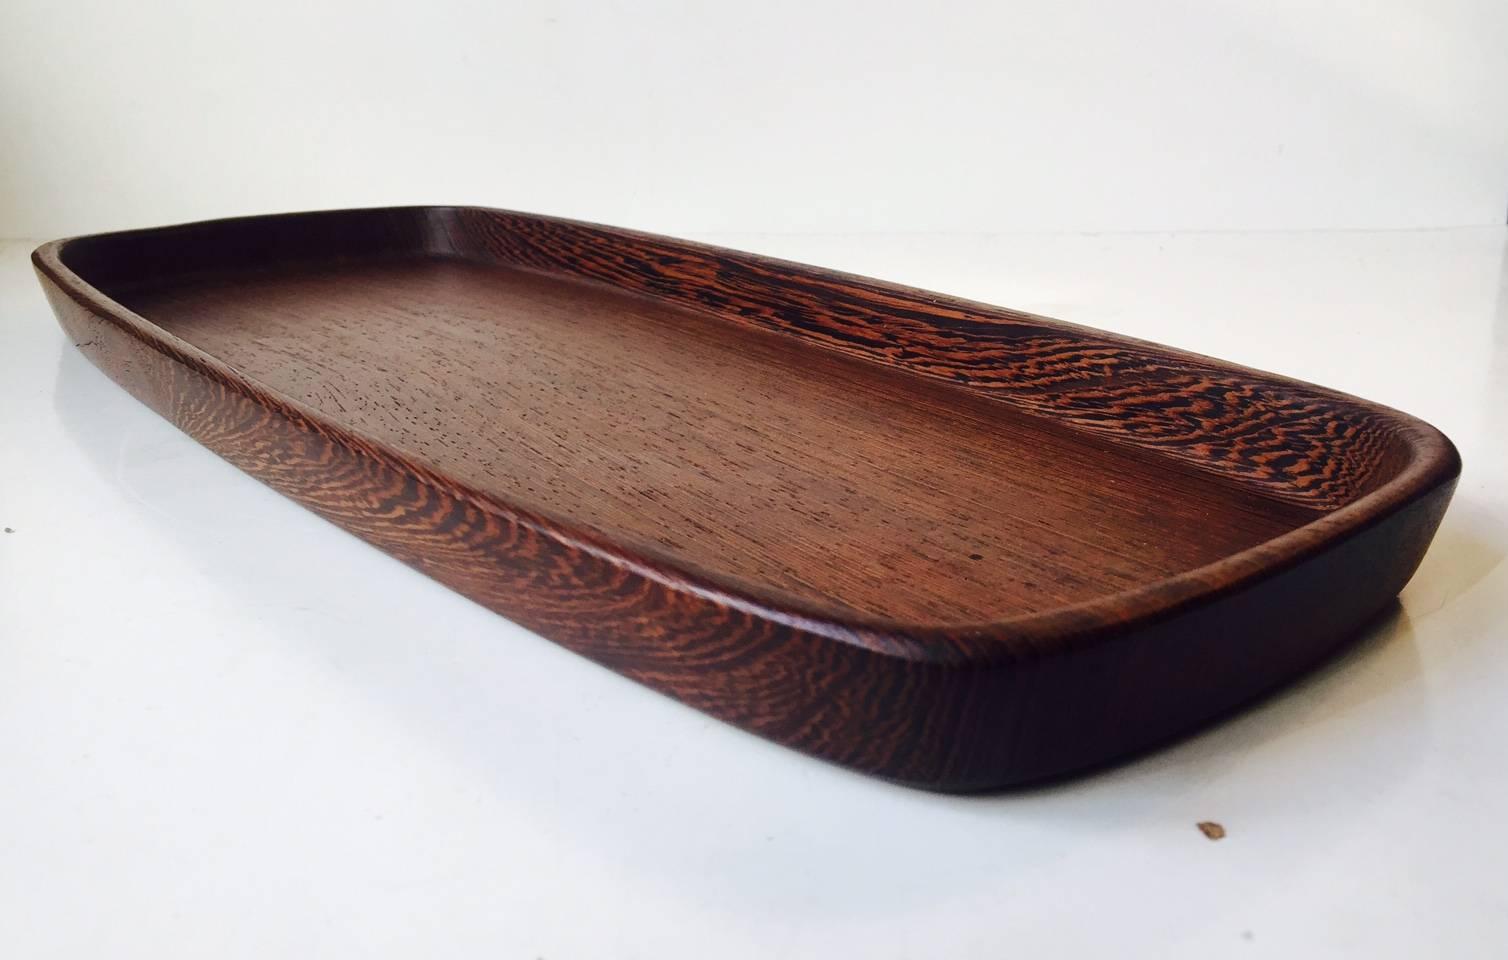 Rectangular solid wengé wood tray designed by Hans Gustav Ehrenreich in Denmark during the 1960s. Ultra-visible wood-grains and in very good vintage condition.